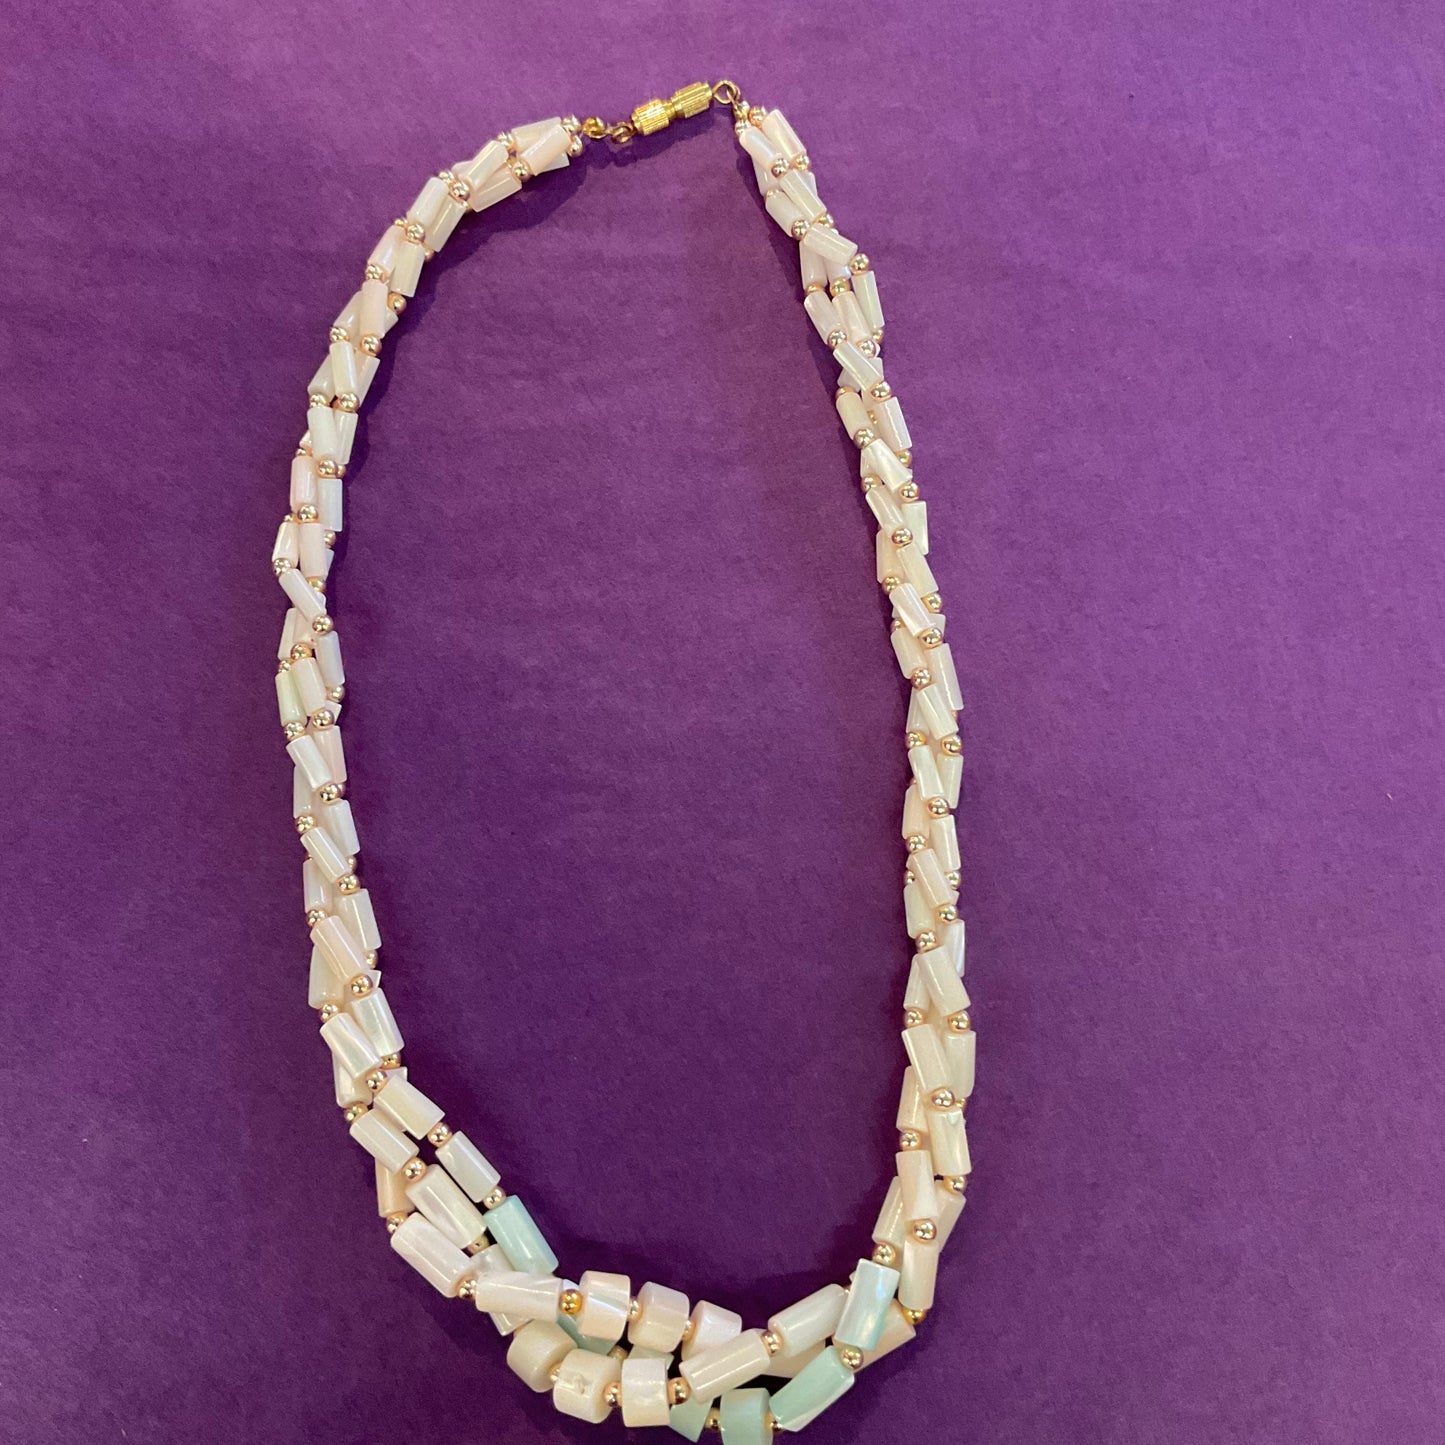 Vintage Mother of pearl twisted beaded necklace with pale aqua centre. prom, wedding.